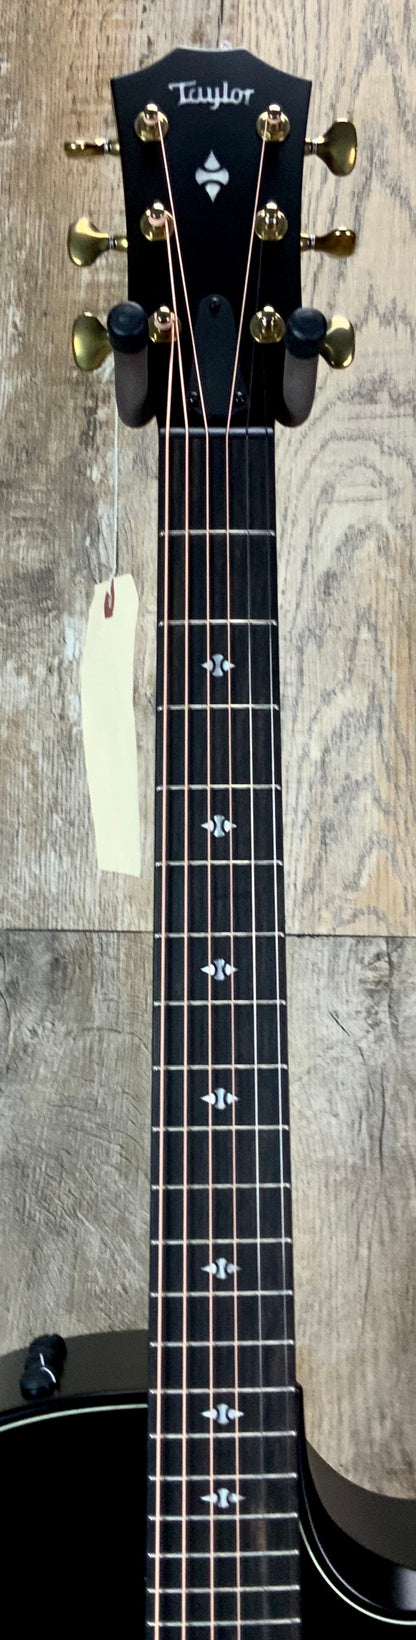 Taylor Builder's Edition 324ce V-Class Bracing Shaded Edgeburst fretboard and headstock.